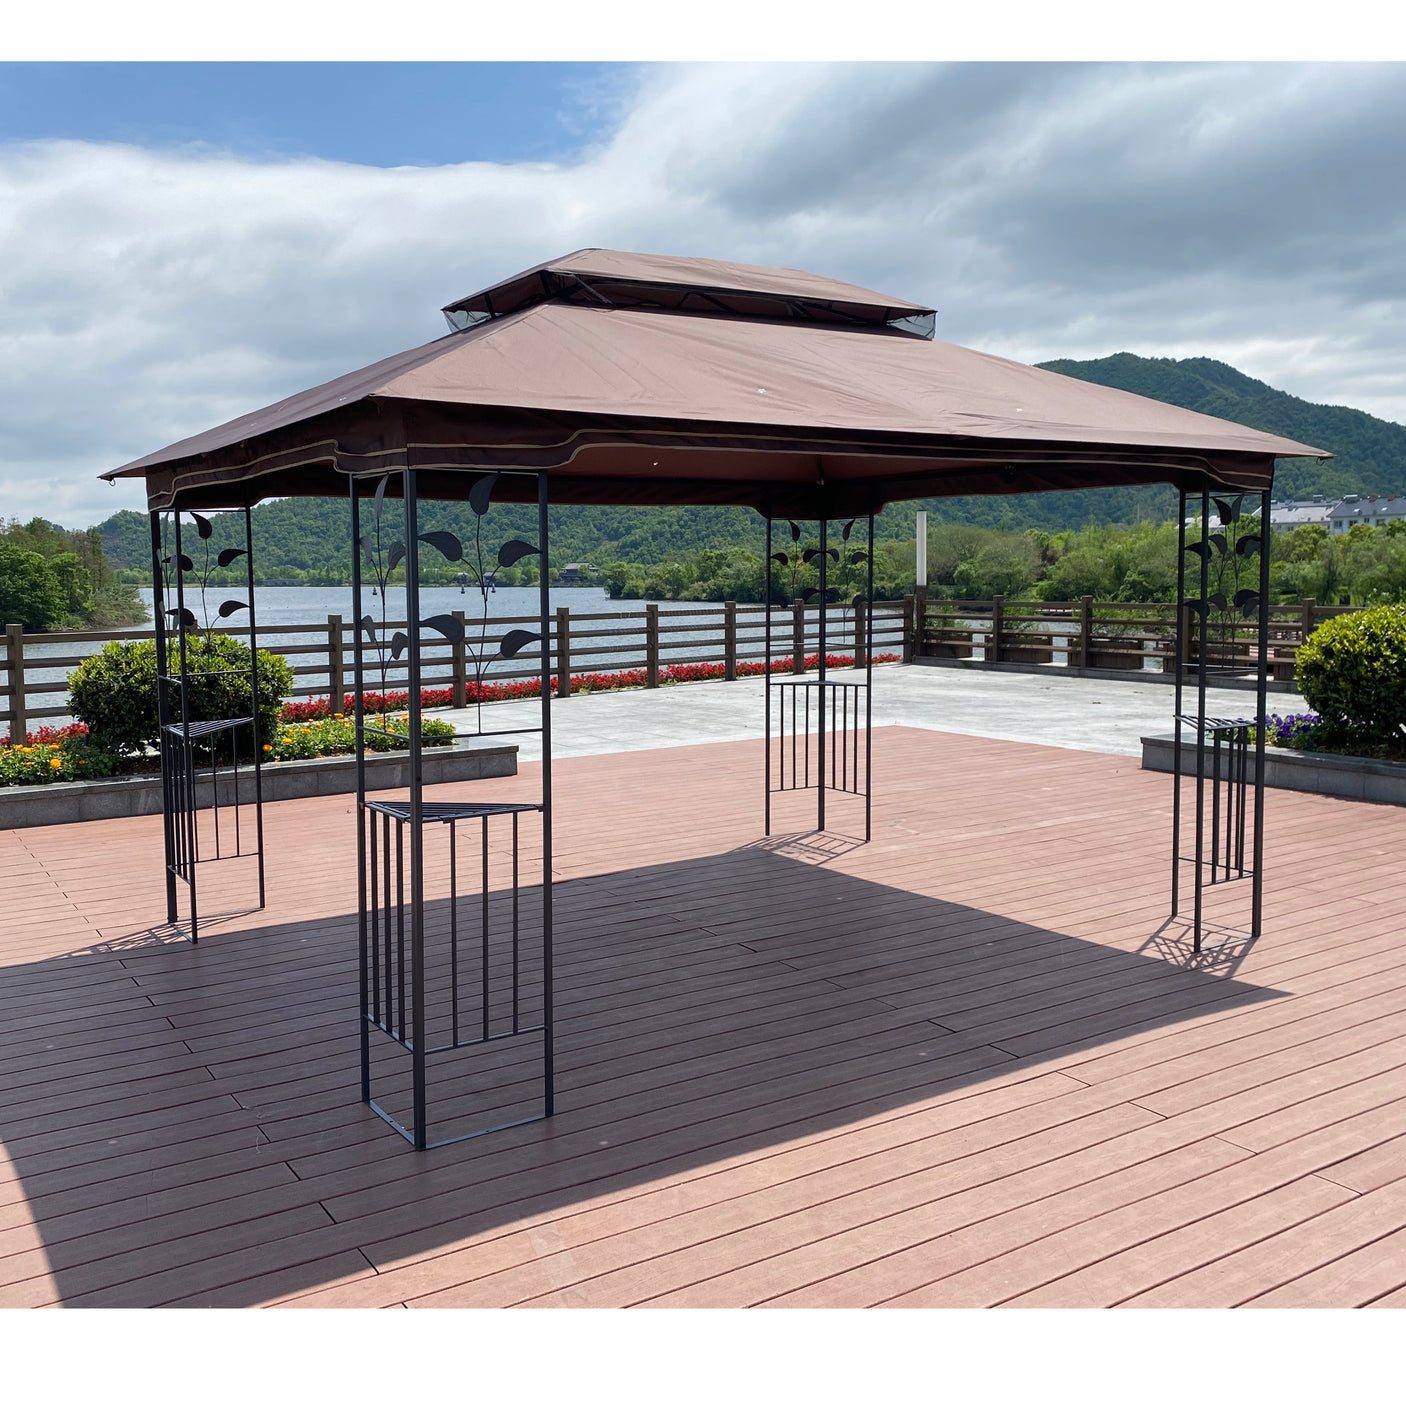 13x10 Outdoor Patio Gazebo Canopy Tent With Ventilated Double Roof And Mosquito net(Detachable Mesh Screen On All Sides),Suitable for Lawn, Garden, Backyard and Deck,Brown Top